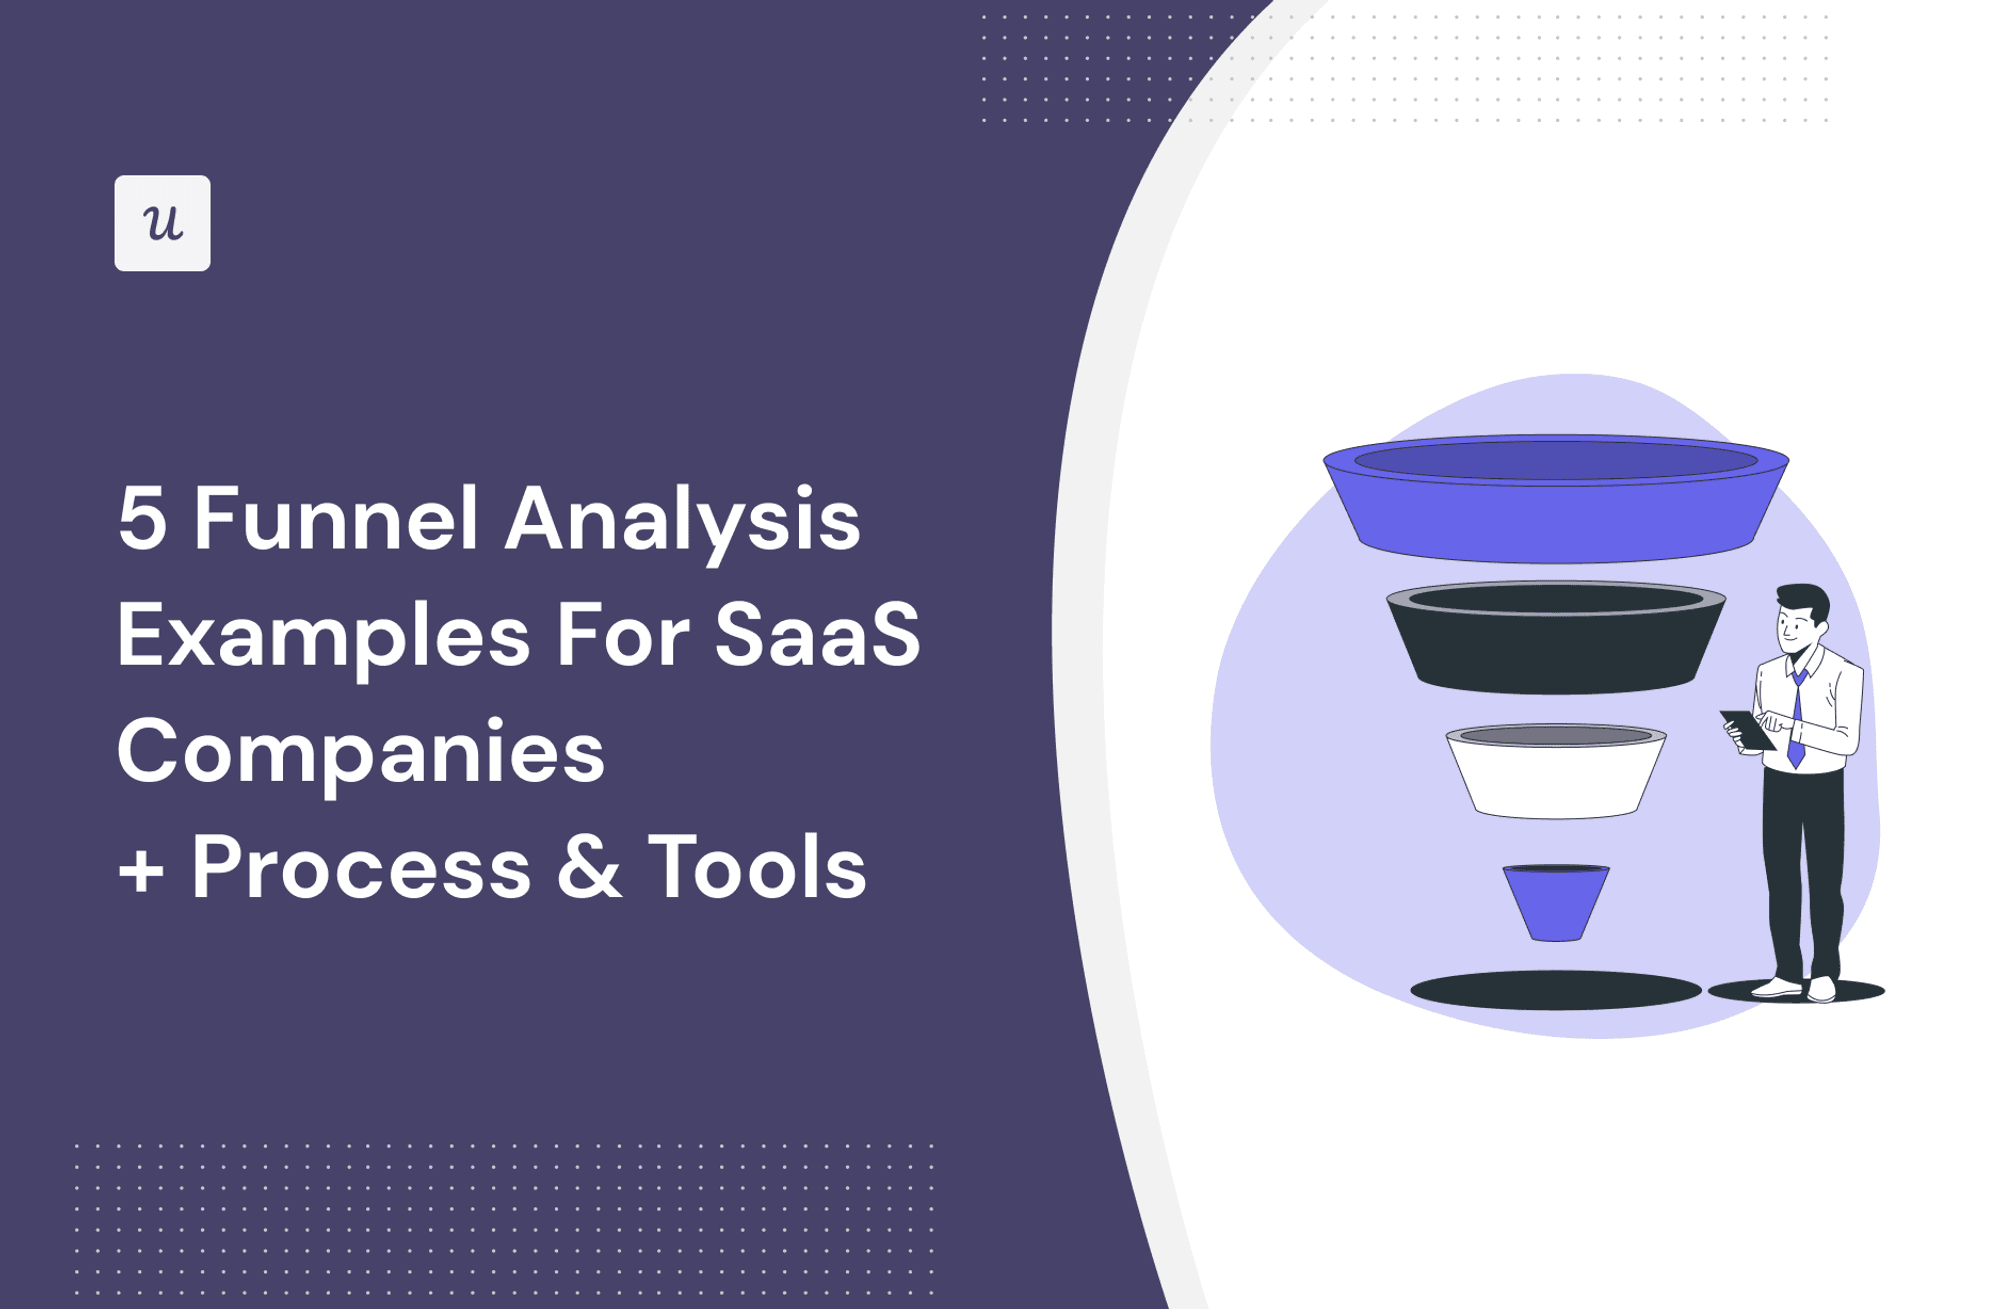 5 Funnel Analysis Examples For SaaS Companies (+ Process & Tools) cover